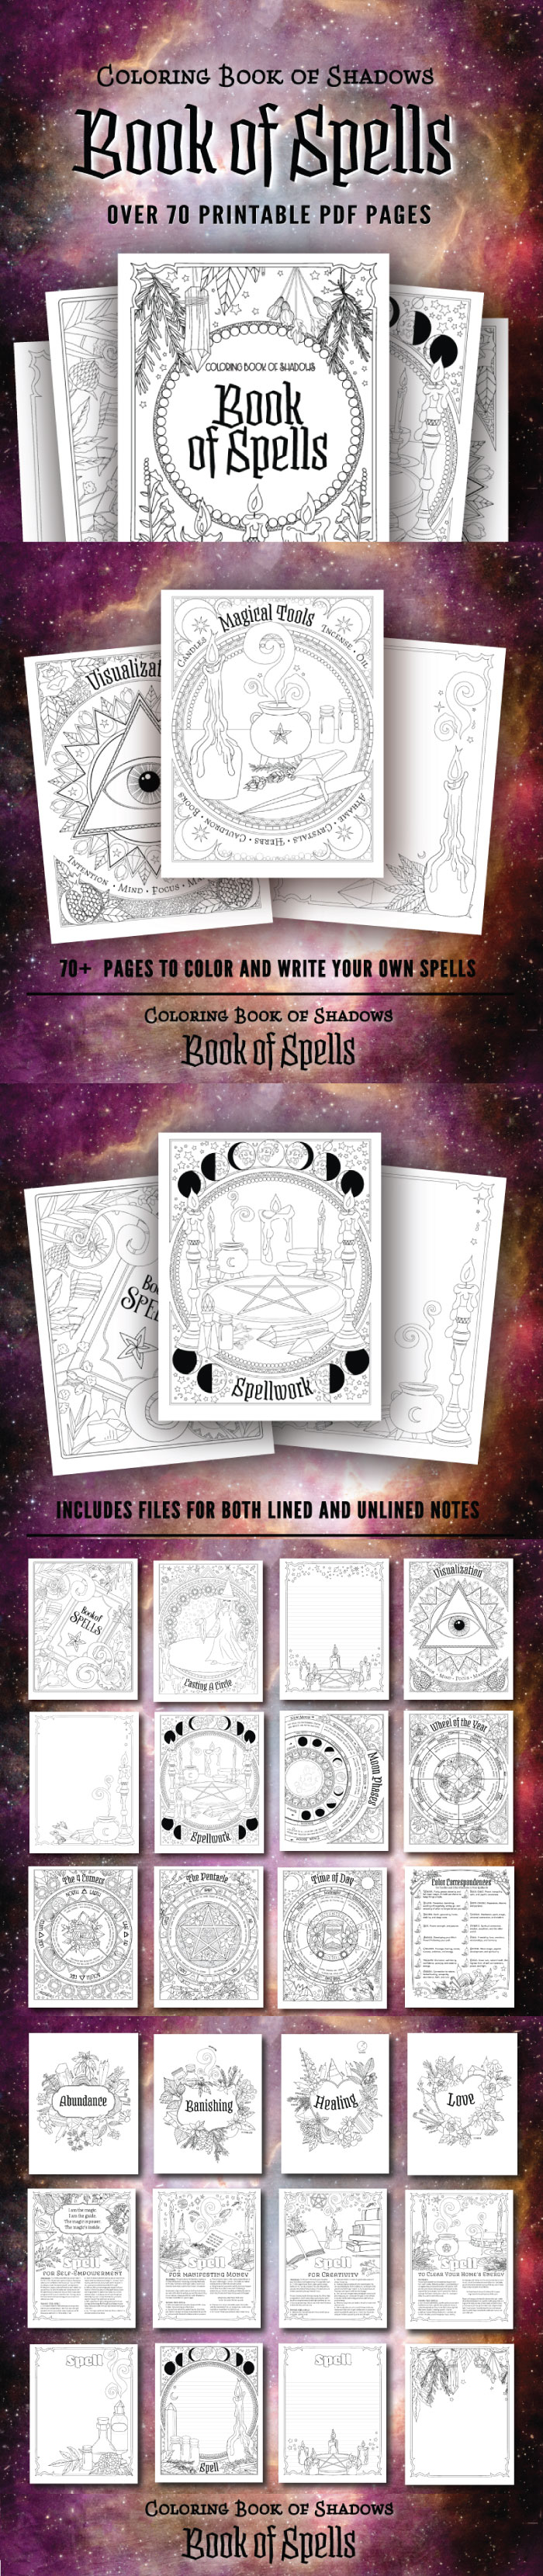 Coloring Book of Shadows Book of Spells Printable PDF